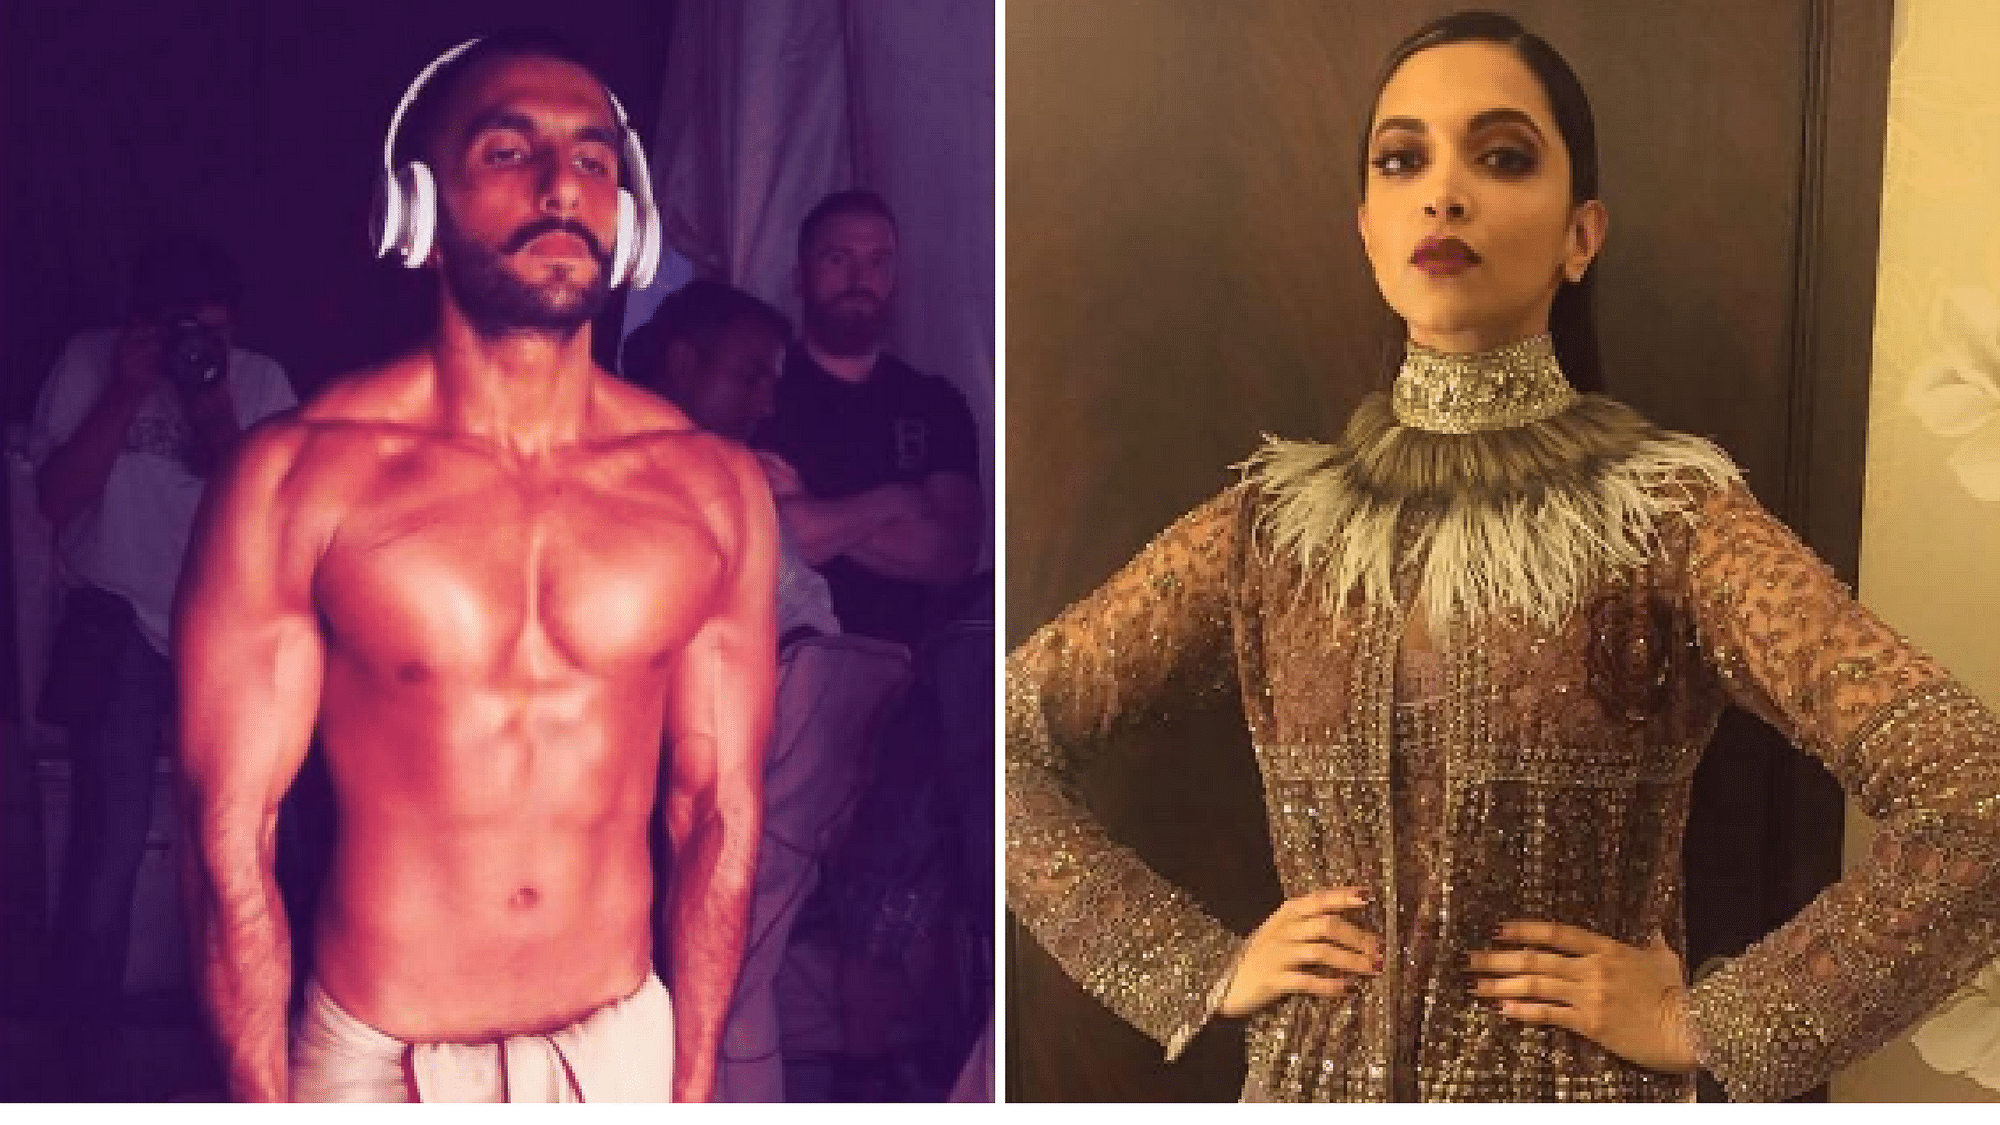 Ranveer Singh and Deepika Padukone are two of the leads in Bhansali’s next. (Photo Courtesy: Instagram/<a href="https://www.instagram.com/ranveersingh/?hl=en">Ranveer Singh</a>/<a href="https://www.instagram.com/deepikapadukone/?hl=en">Deepika Padukone</a>)